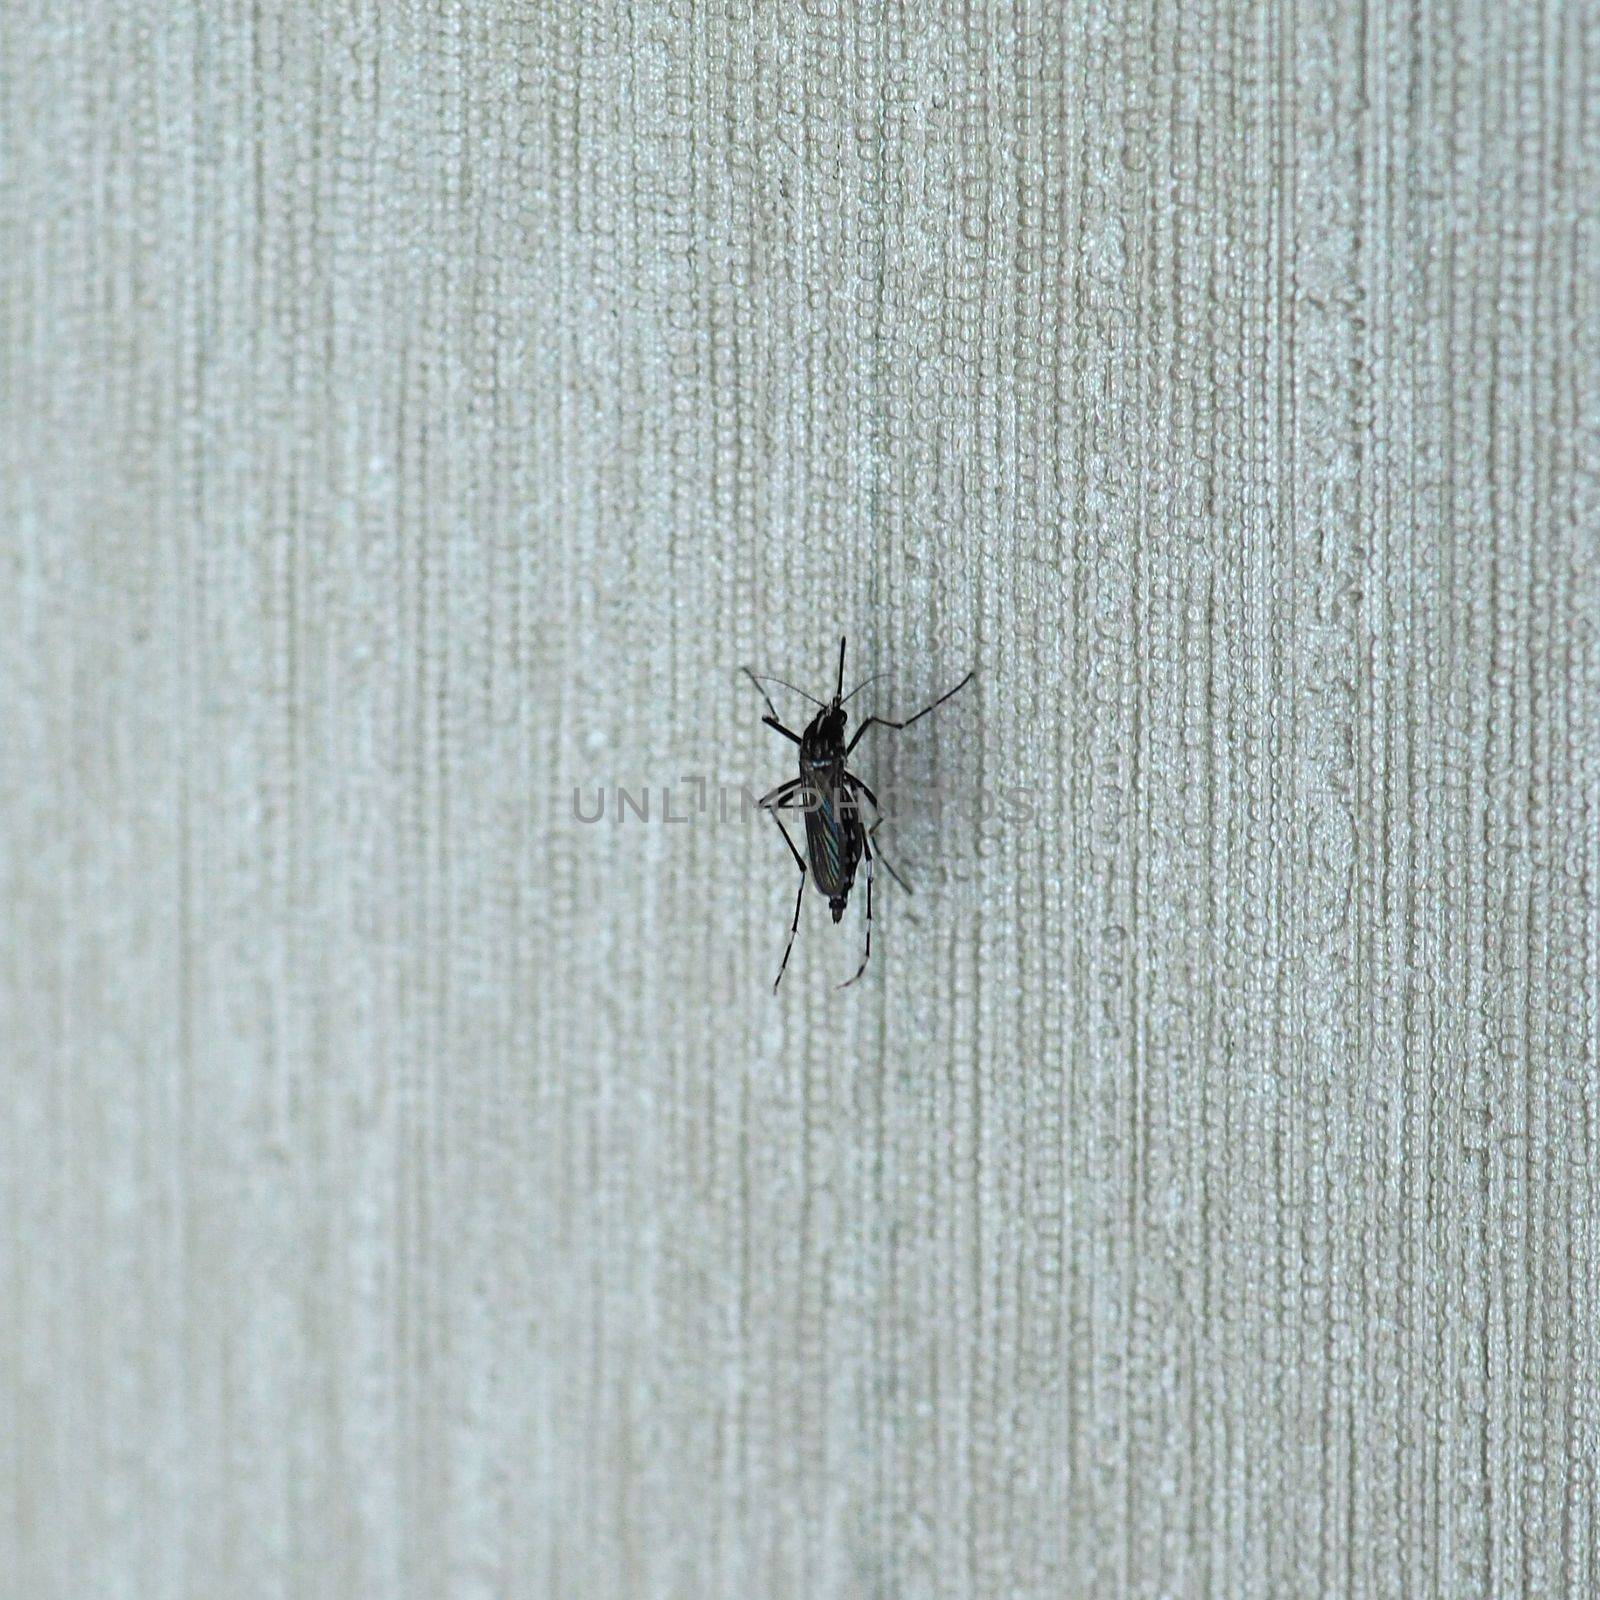 Tiger mosquito (midge fly of family Culicidae) insect animal on a wall indoor